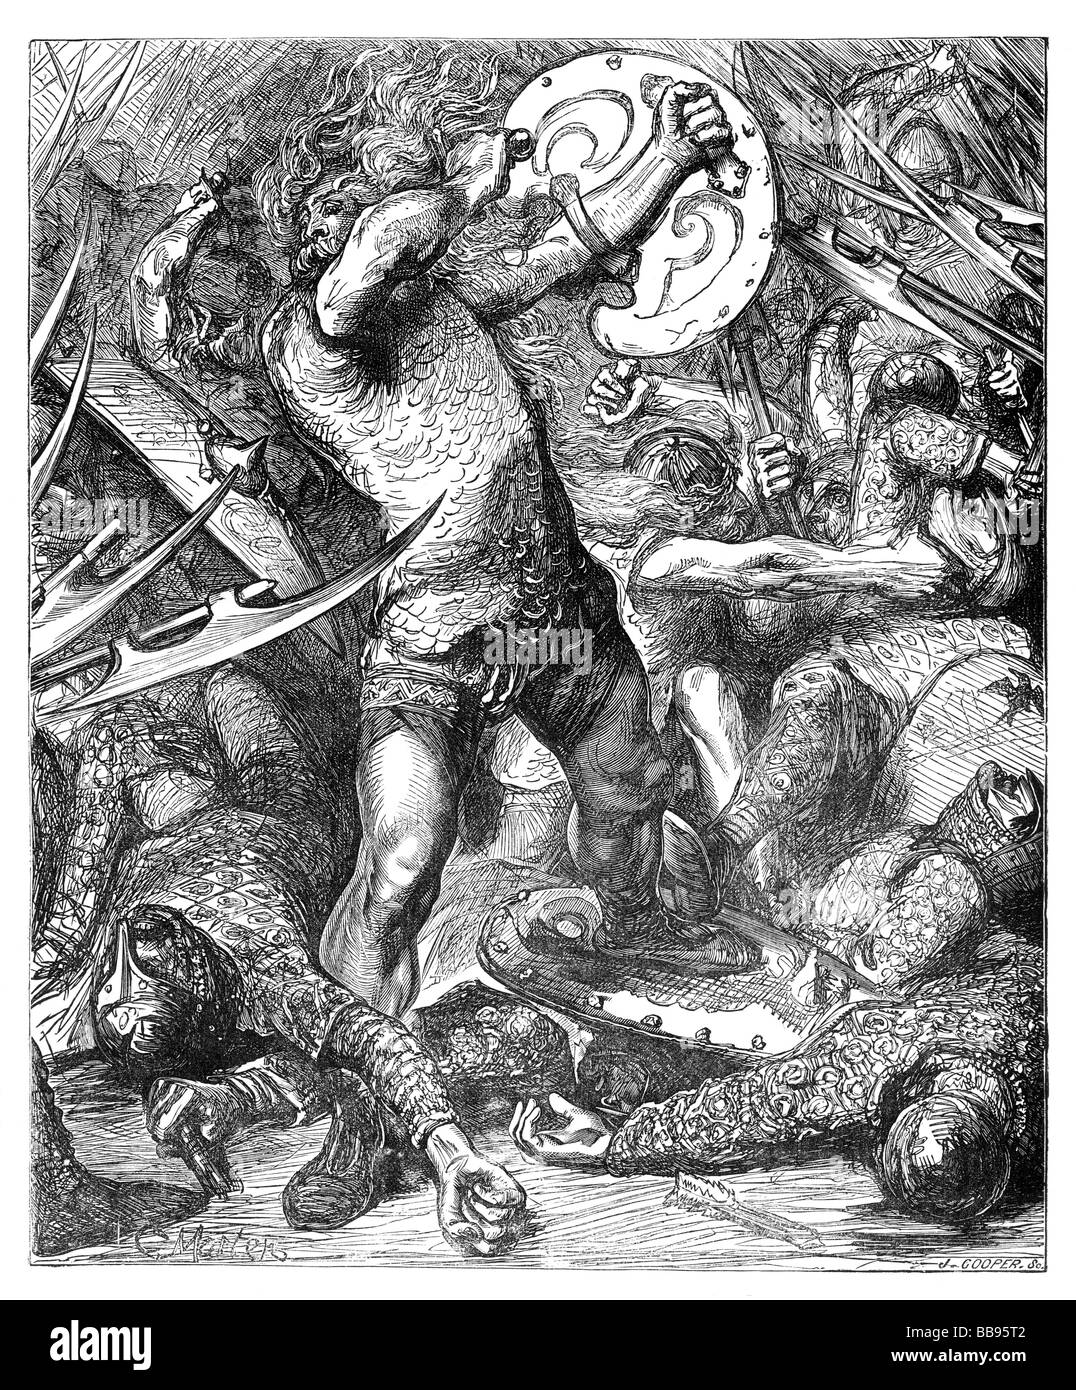 Illustration of Hereward the Wake making good his escape after his defeat by William the Conqueror s army Battle of Ely AD1071 Stock Photo